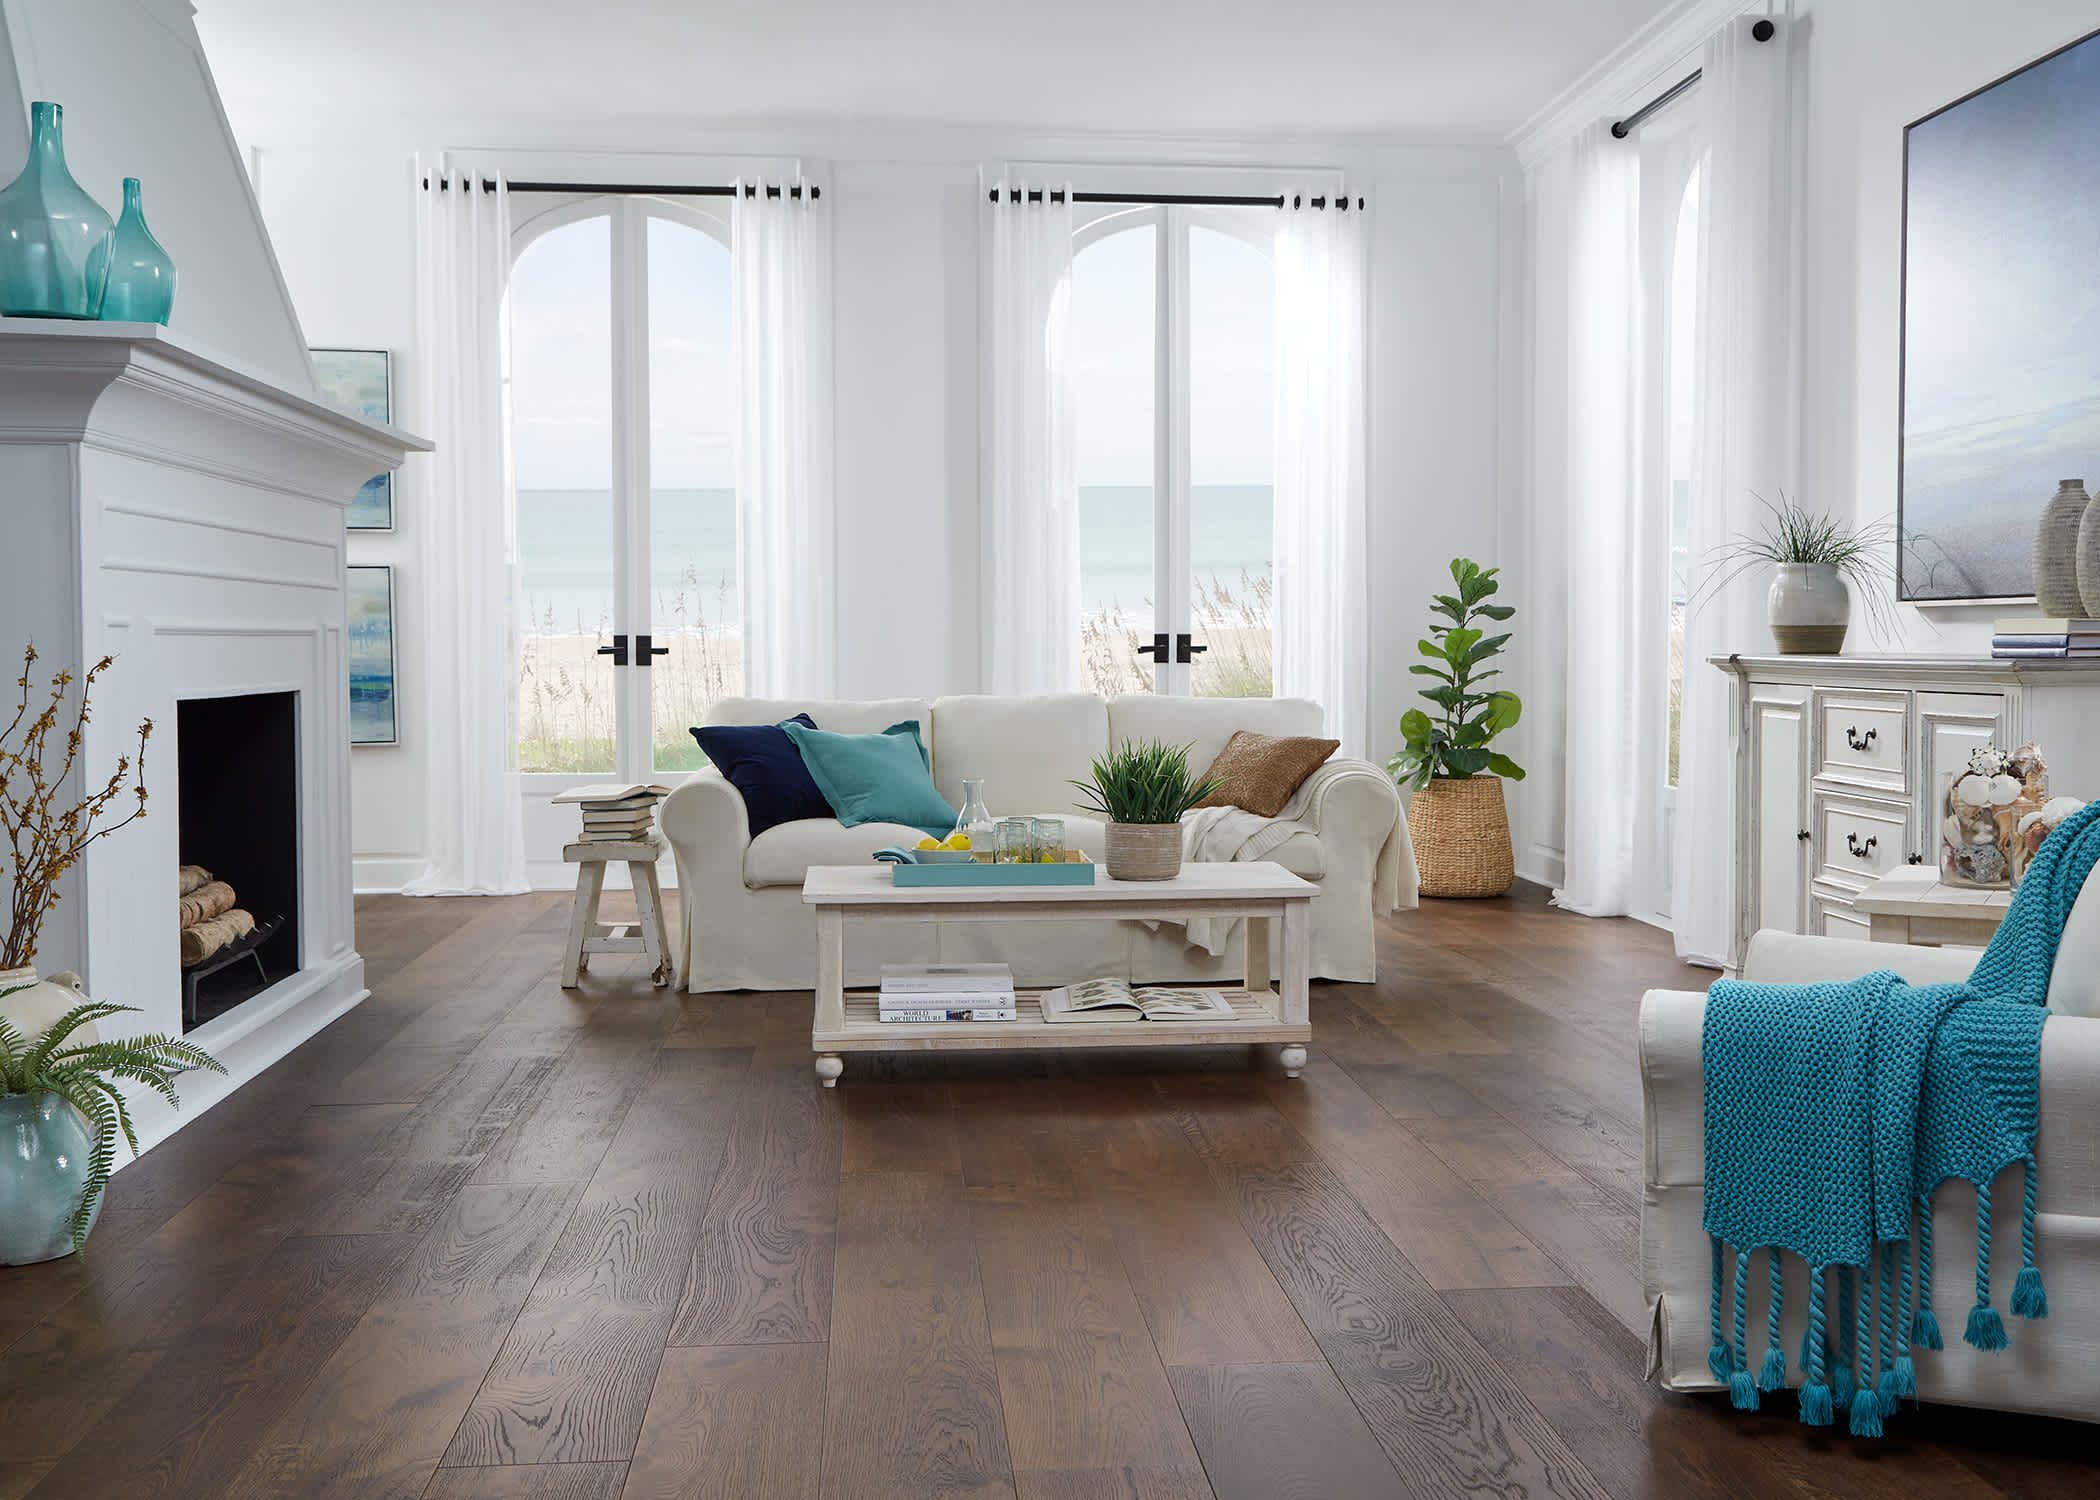 Rockaway Beach White Oak Distressed Engineered Hardwood Flooring in living room with white furniture and turquoise accents